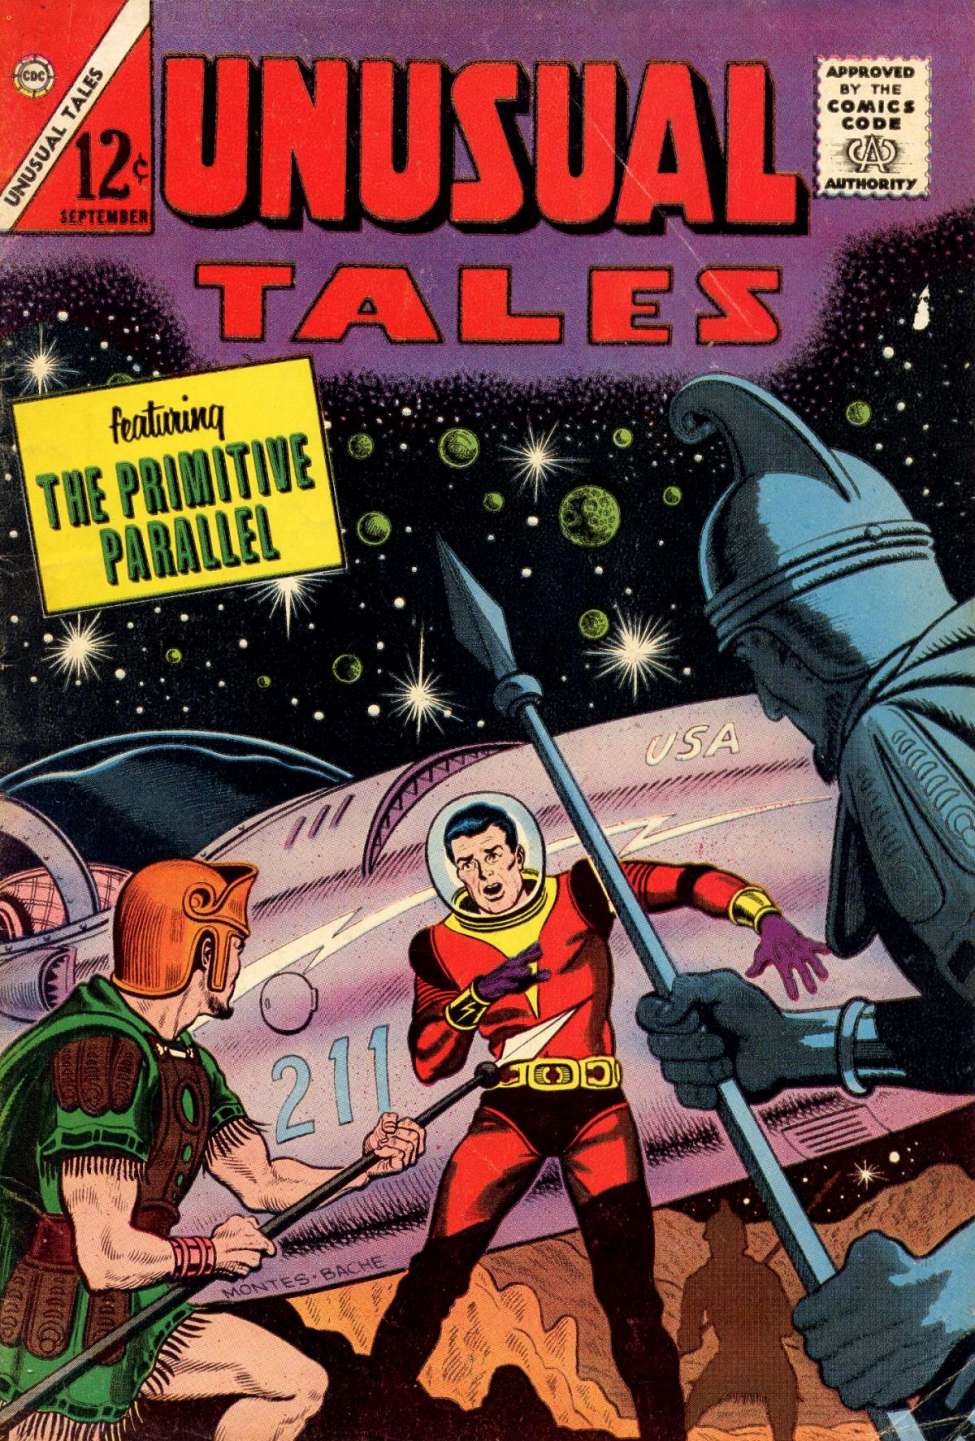 Comic Book Cover For Unusual Tales 41 - Version 1